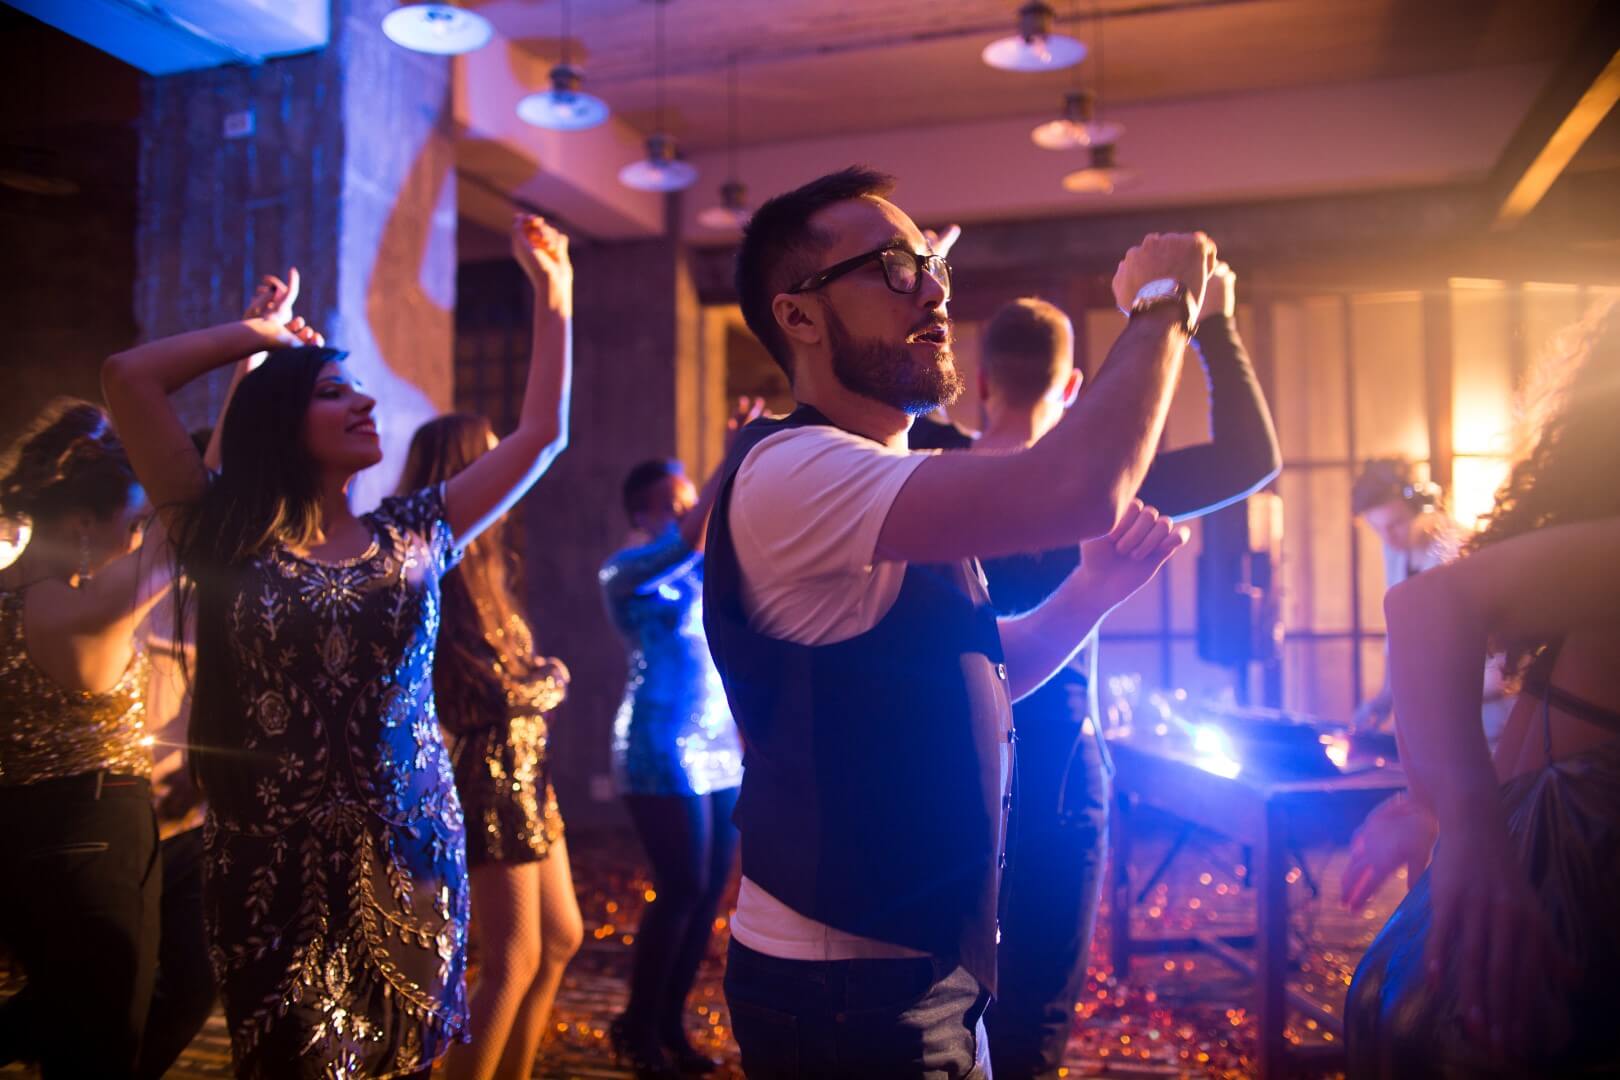 Crowd of trendy  people dancing in nightclub with golden confetti flying around, focus on Asian man dancing in center enjoying party